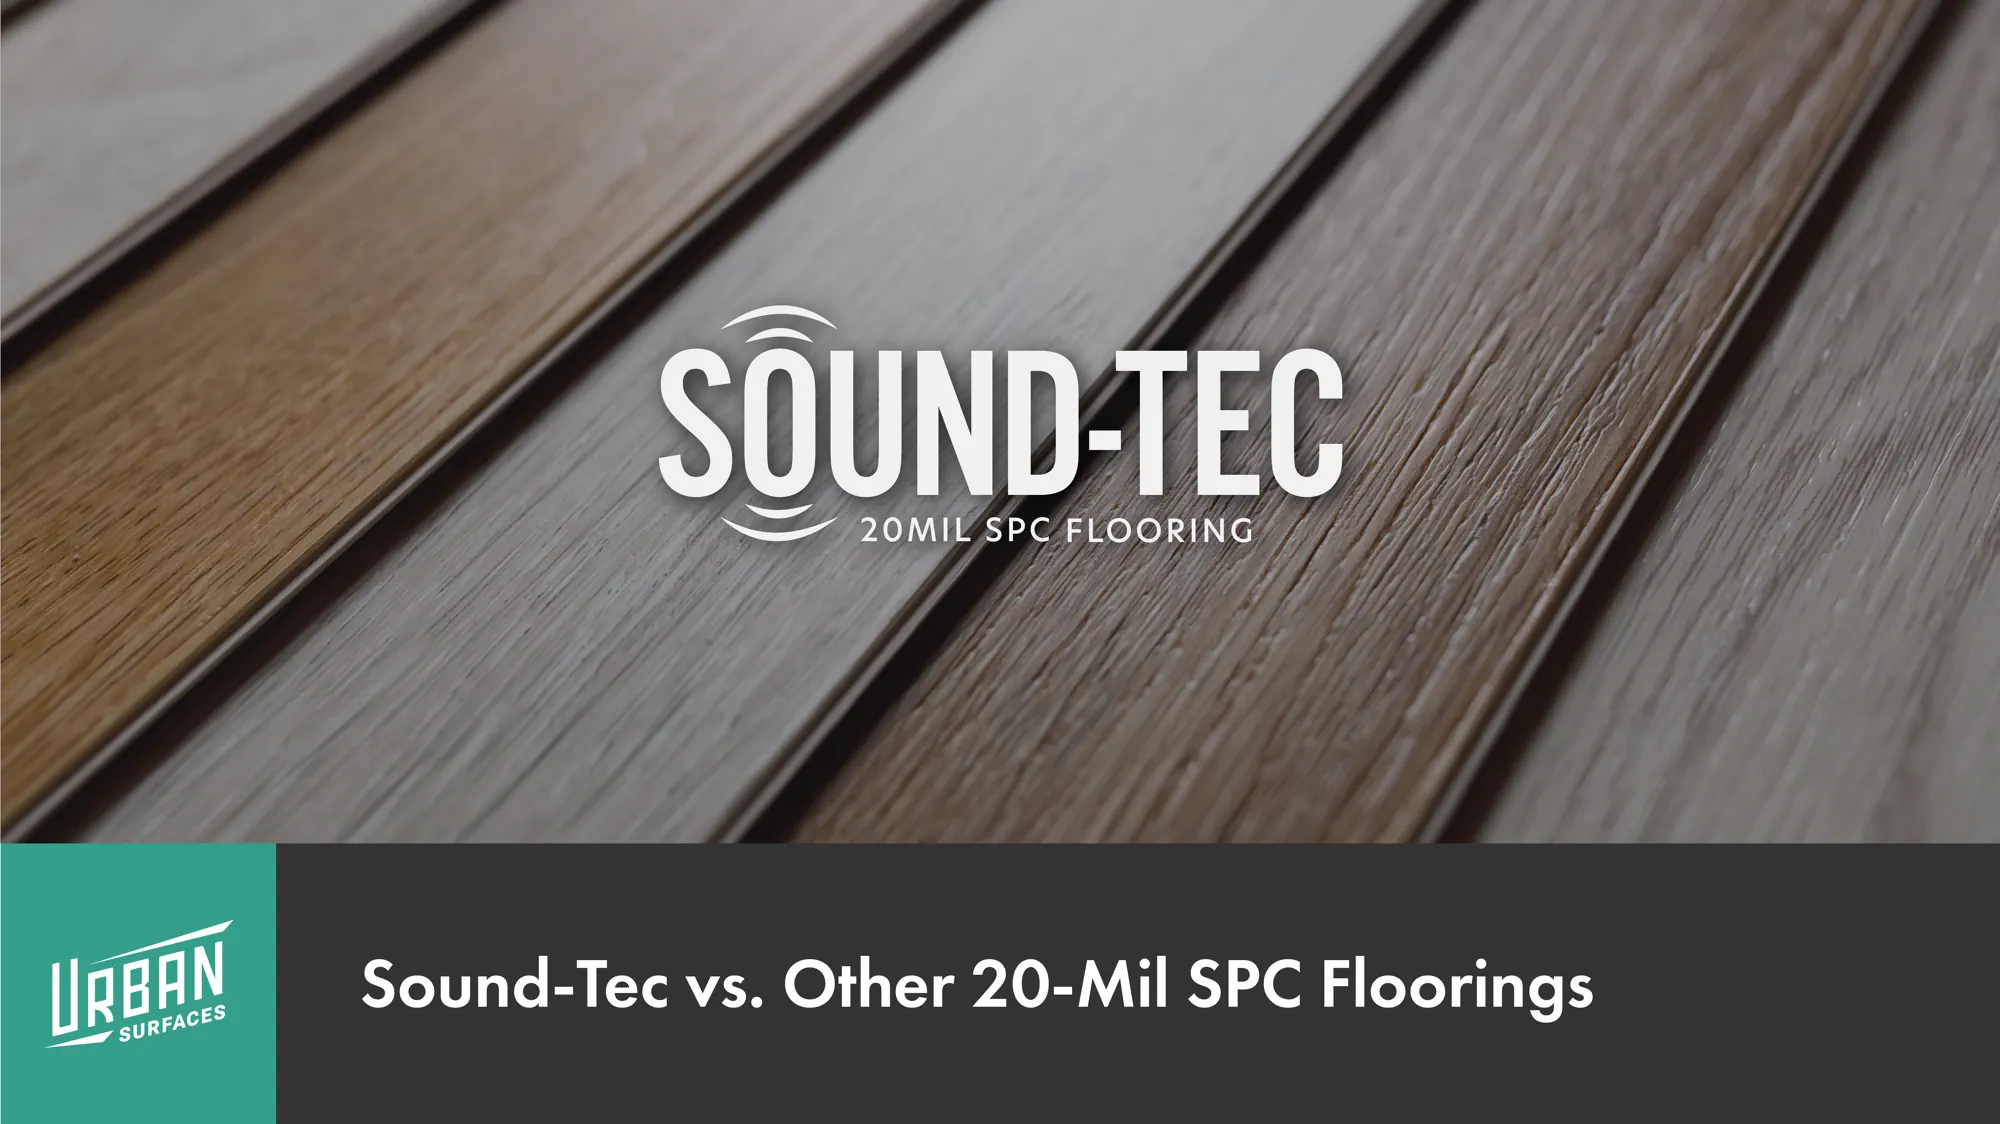 Sound-Tec Floating Floor logo with background of SPC flooring planks. Title: Sound-Tec vs Other 20mil SPC Floorings.